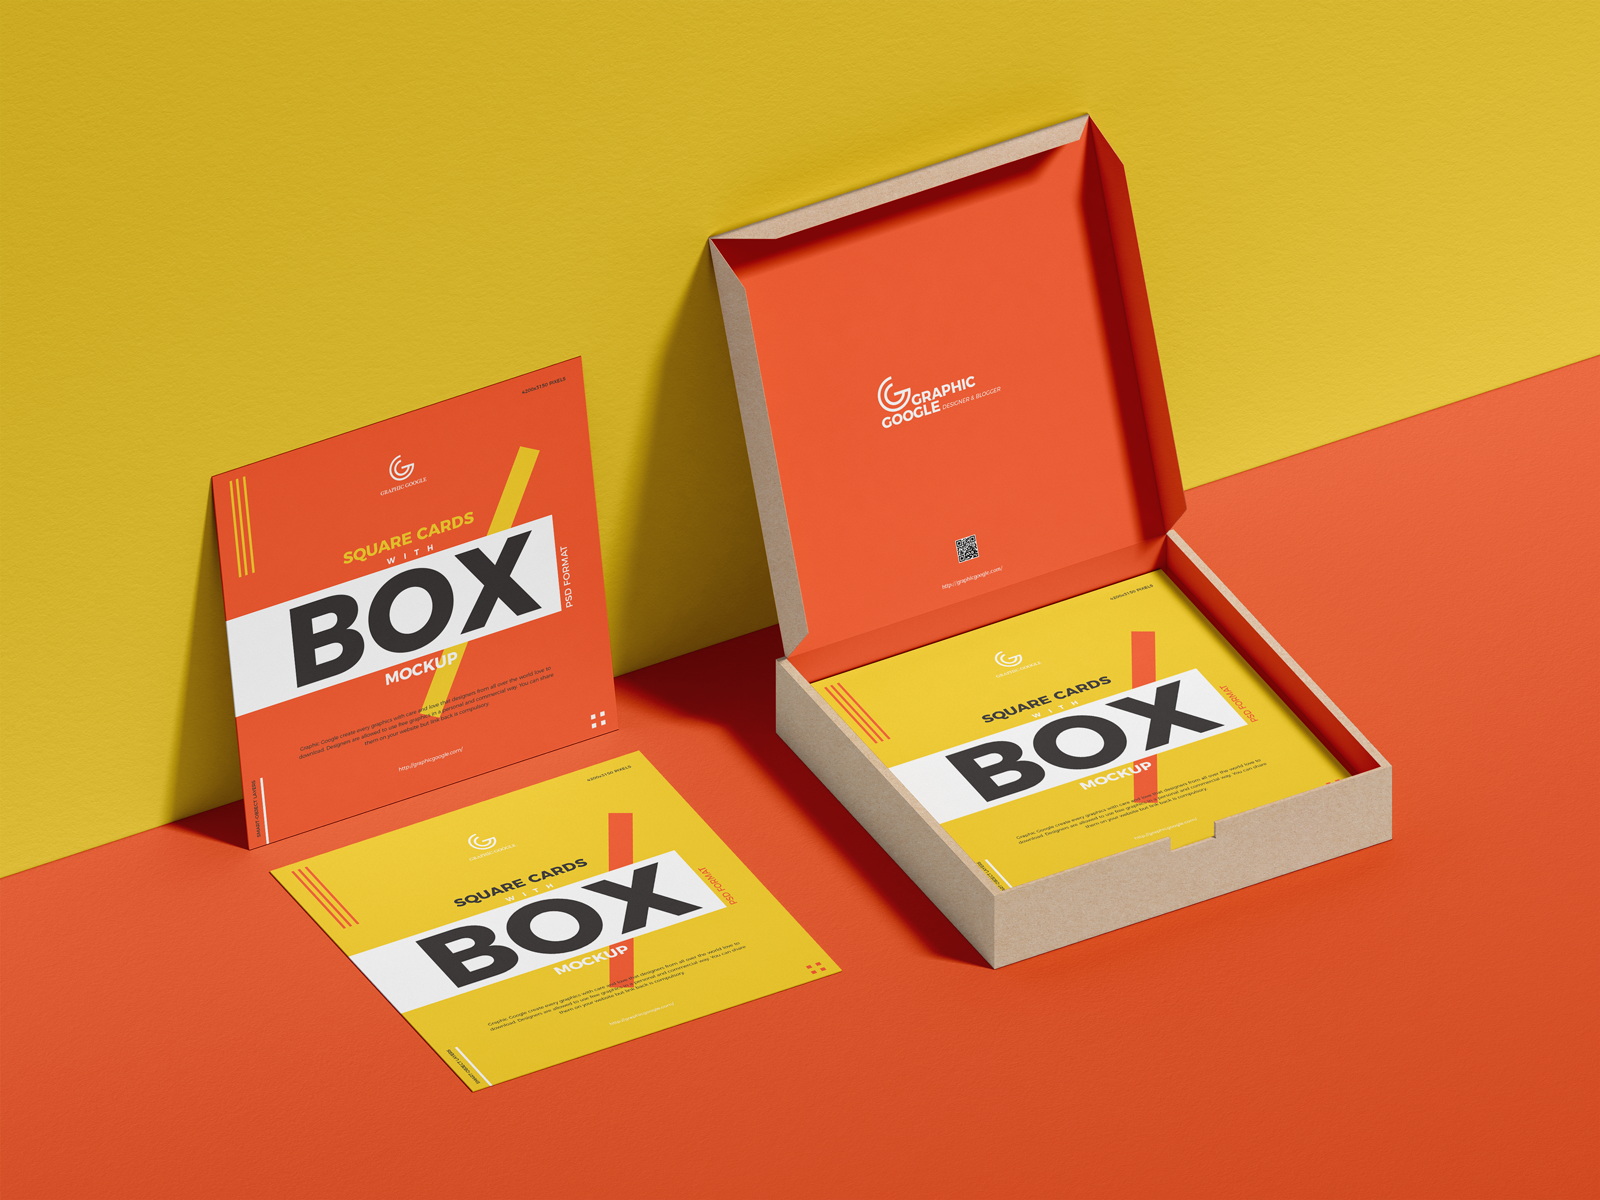 Download Free Square Cards With Box Mockup by Graphic Google on ...